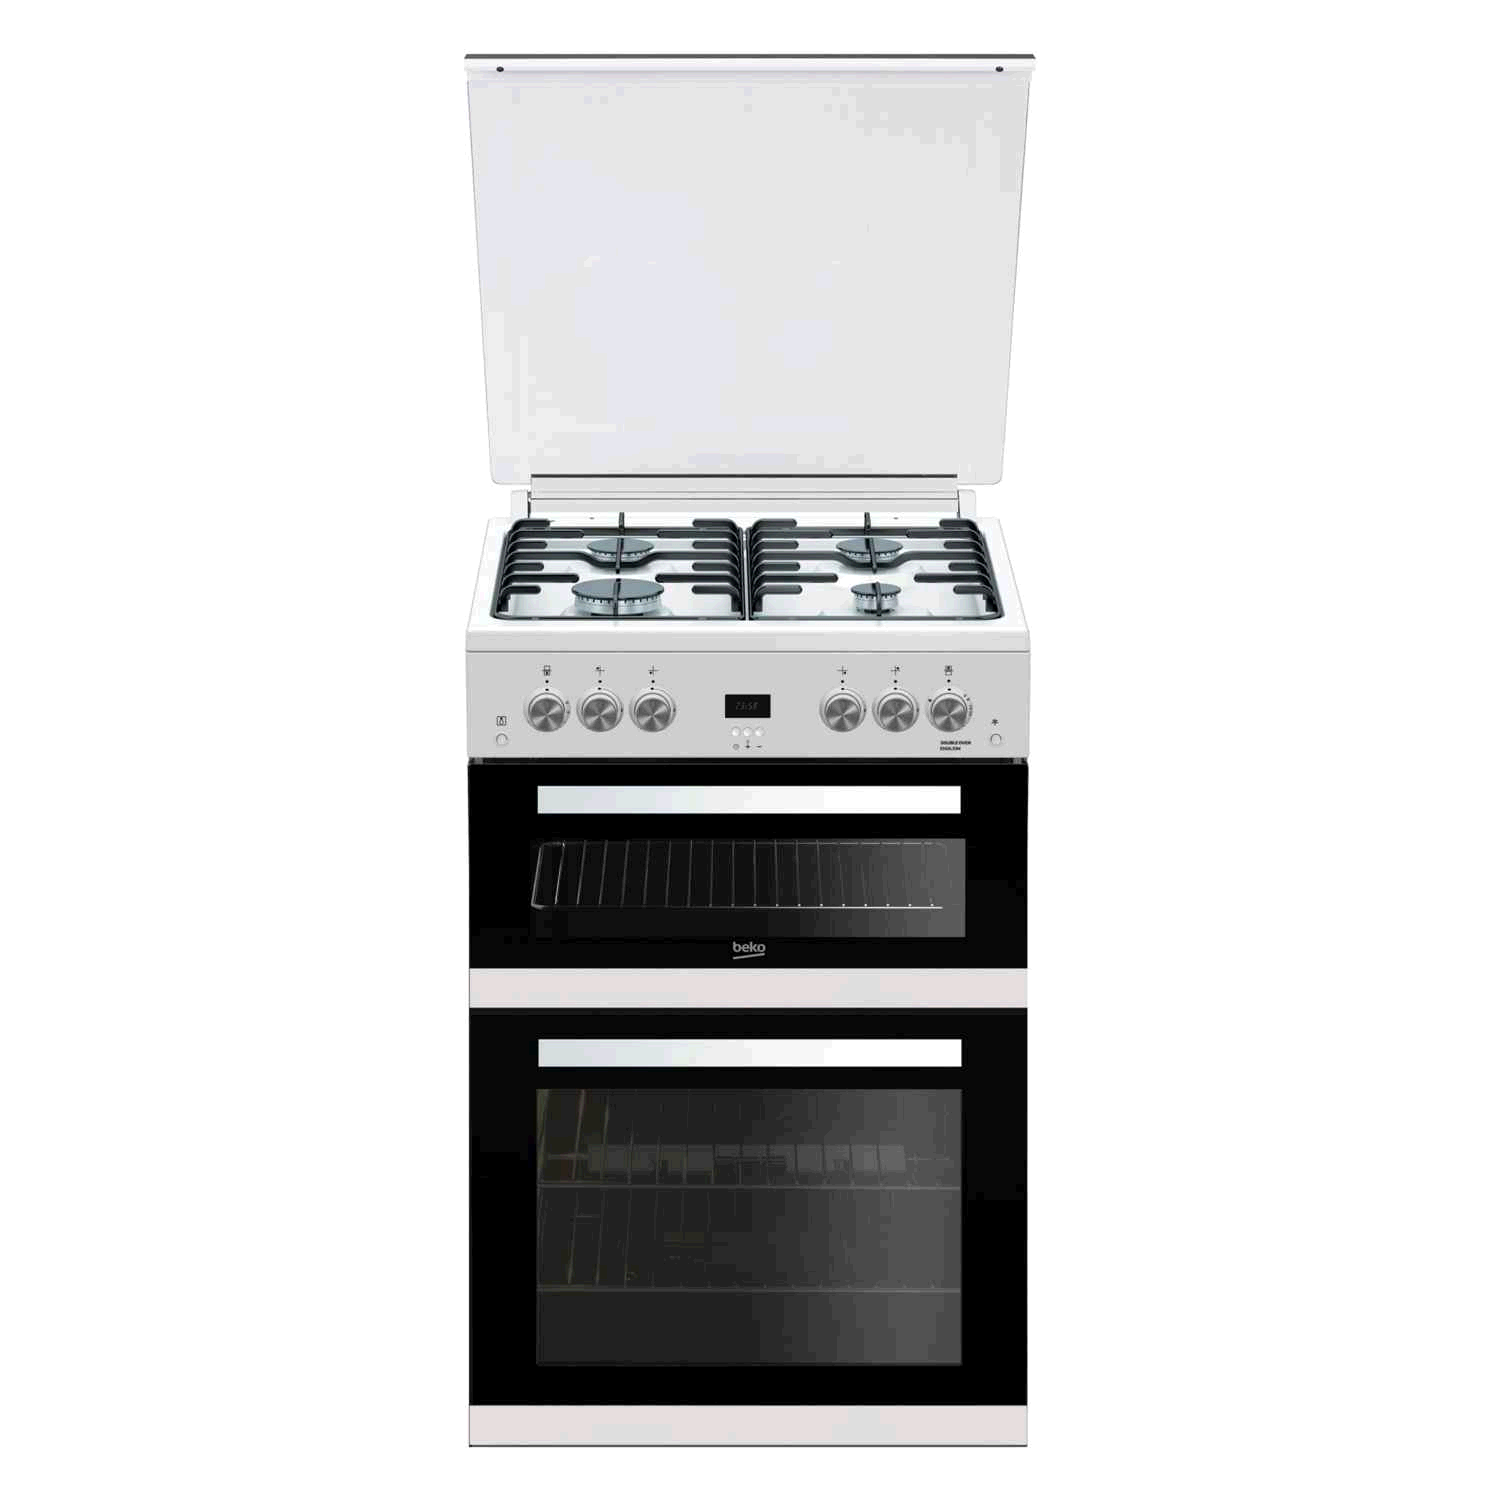 Beko Double Oven Gas Cooker White 60cm LPG Convertible Glass Lid 